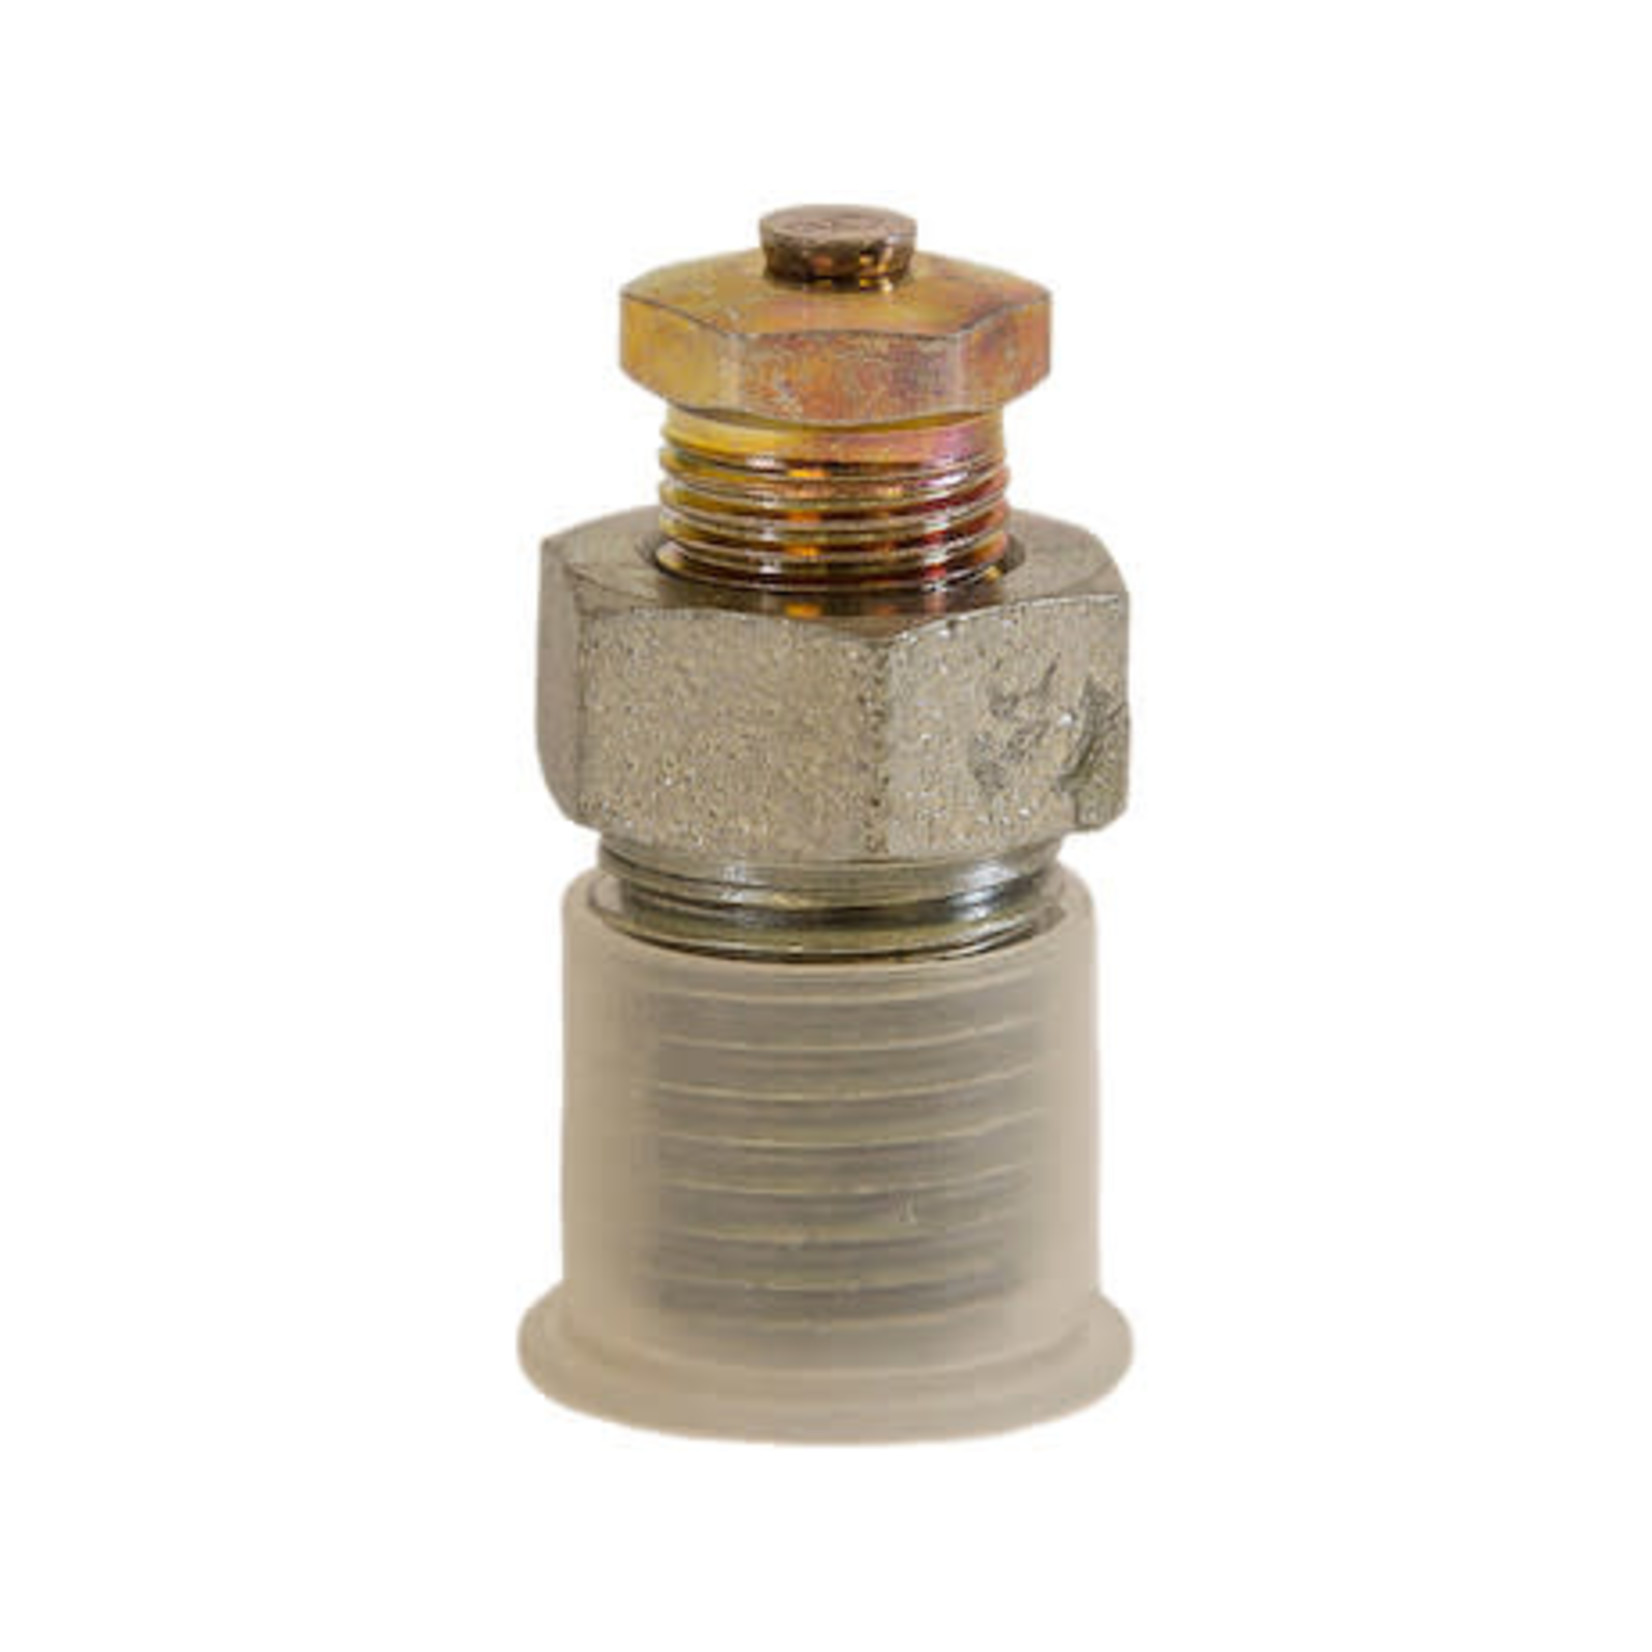 SAM SAM Pressure Relief Valve With Bushing-Replaces Meyer #08473